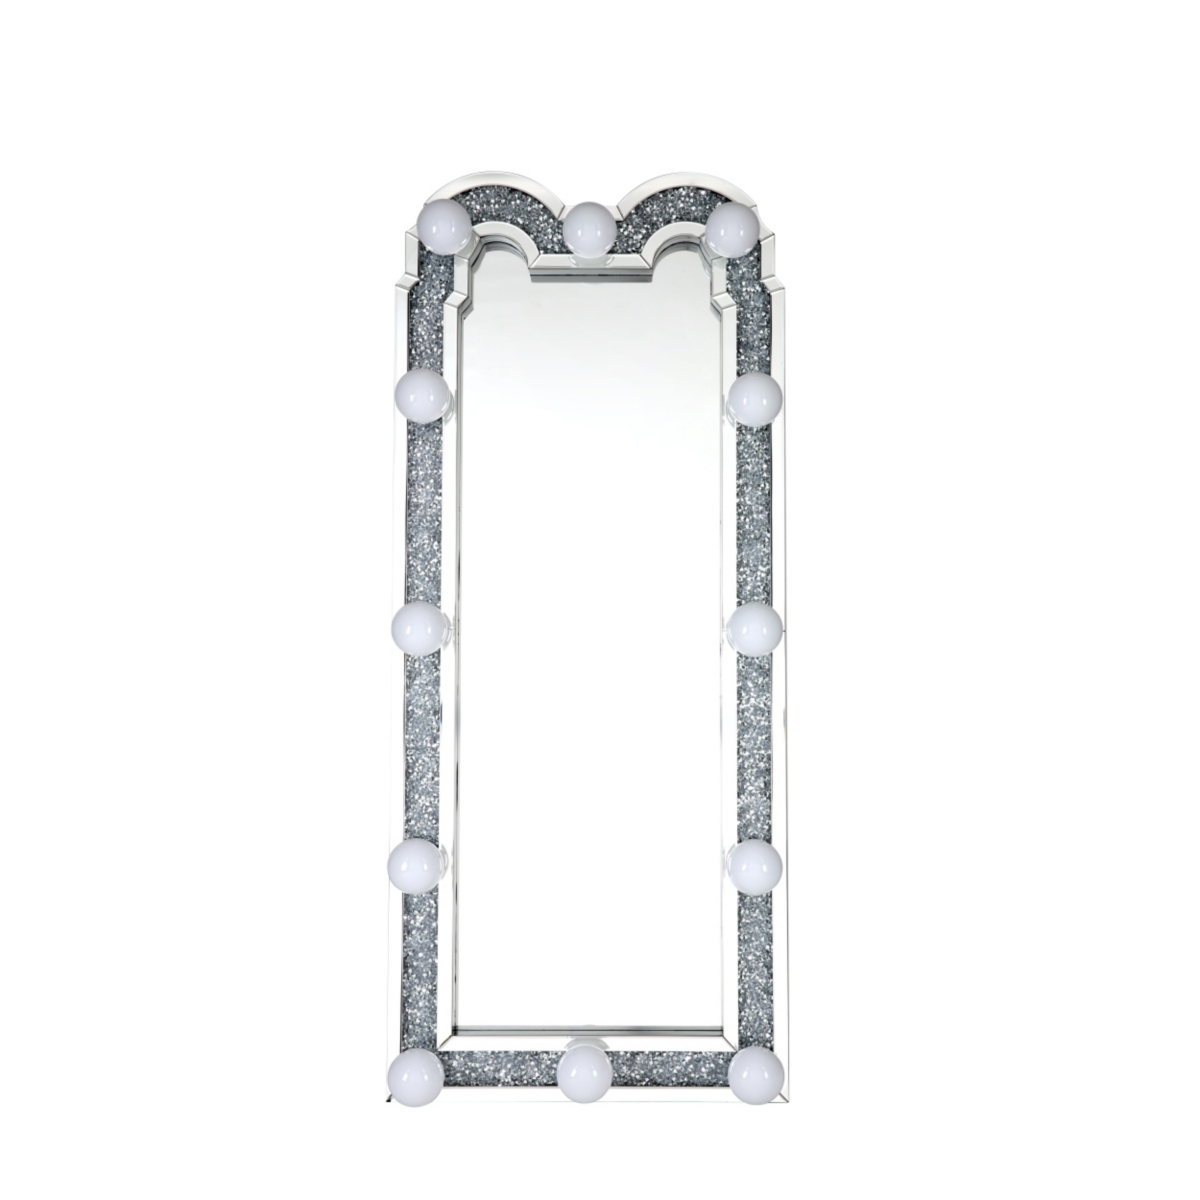 Noralie Accent Floor Mirror In Mirrored & Faux Diamonds - Silver